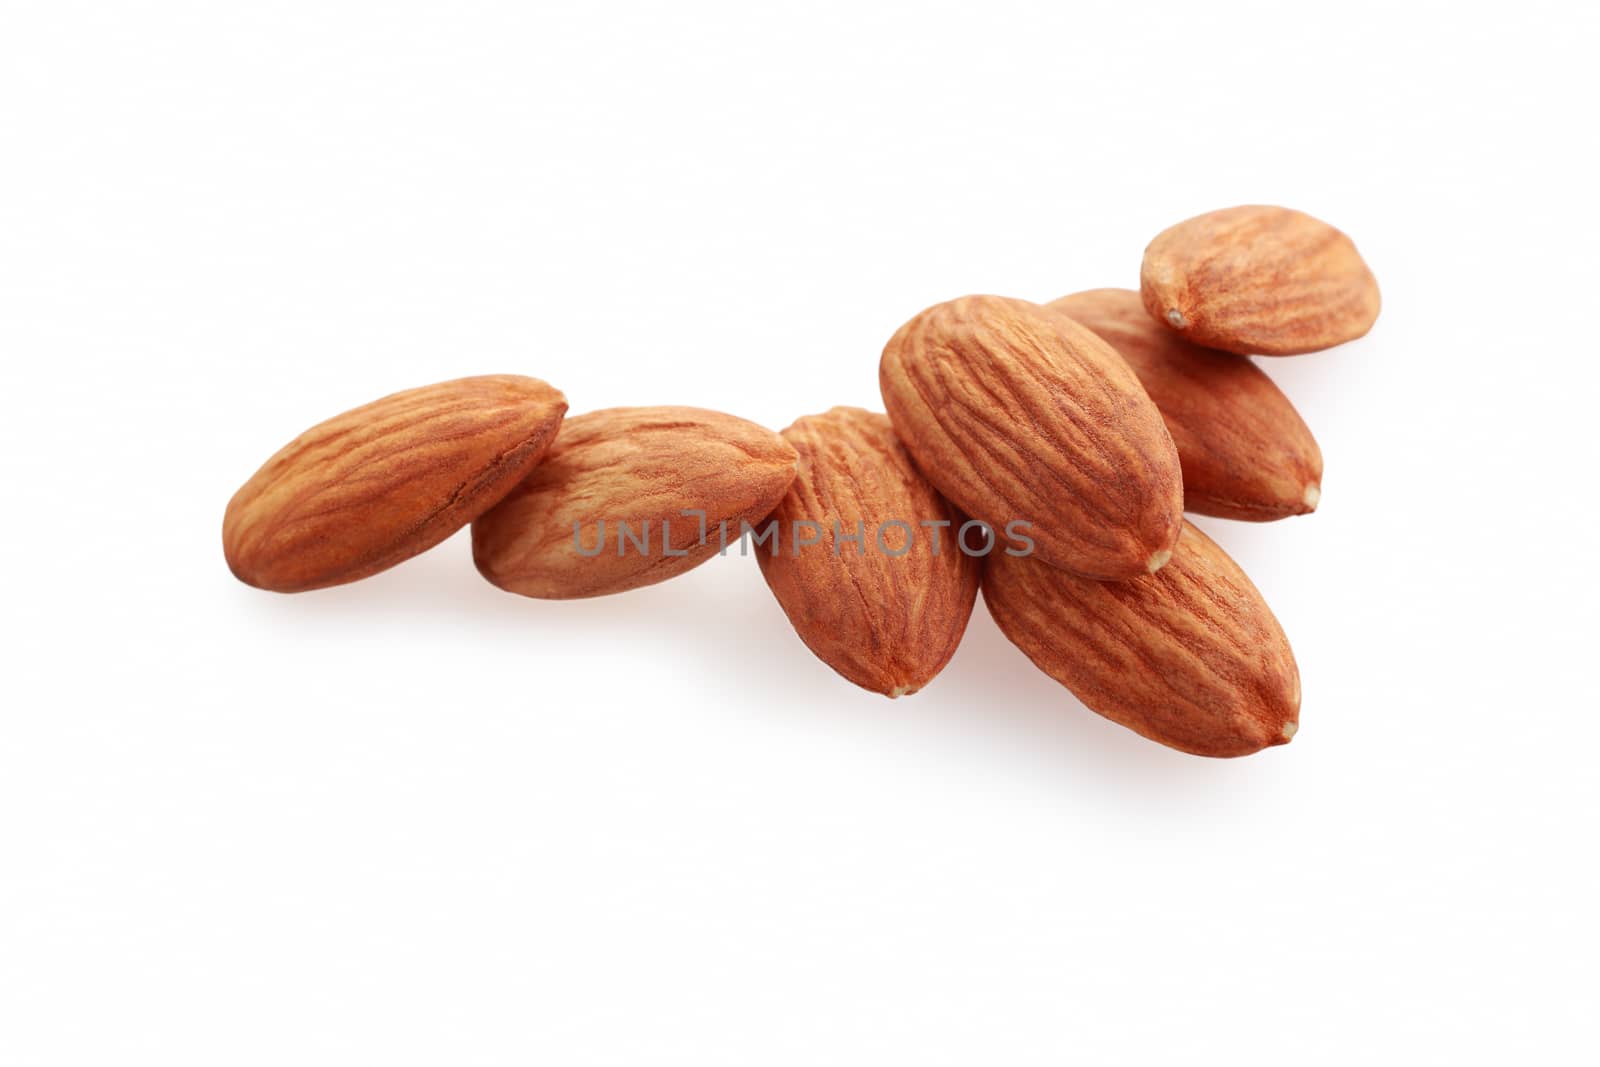 Glass bowl with almonds nuts isolated on white background.